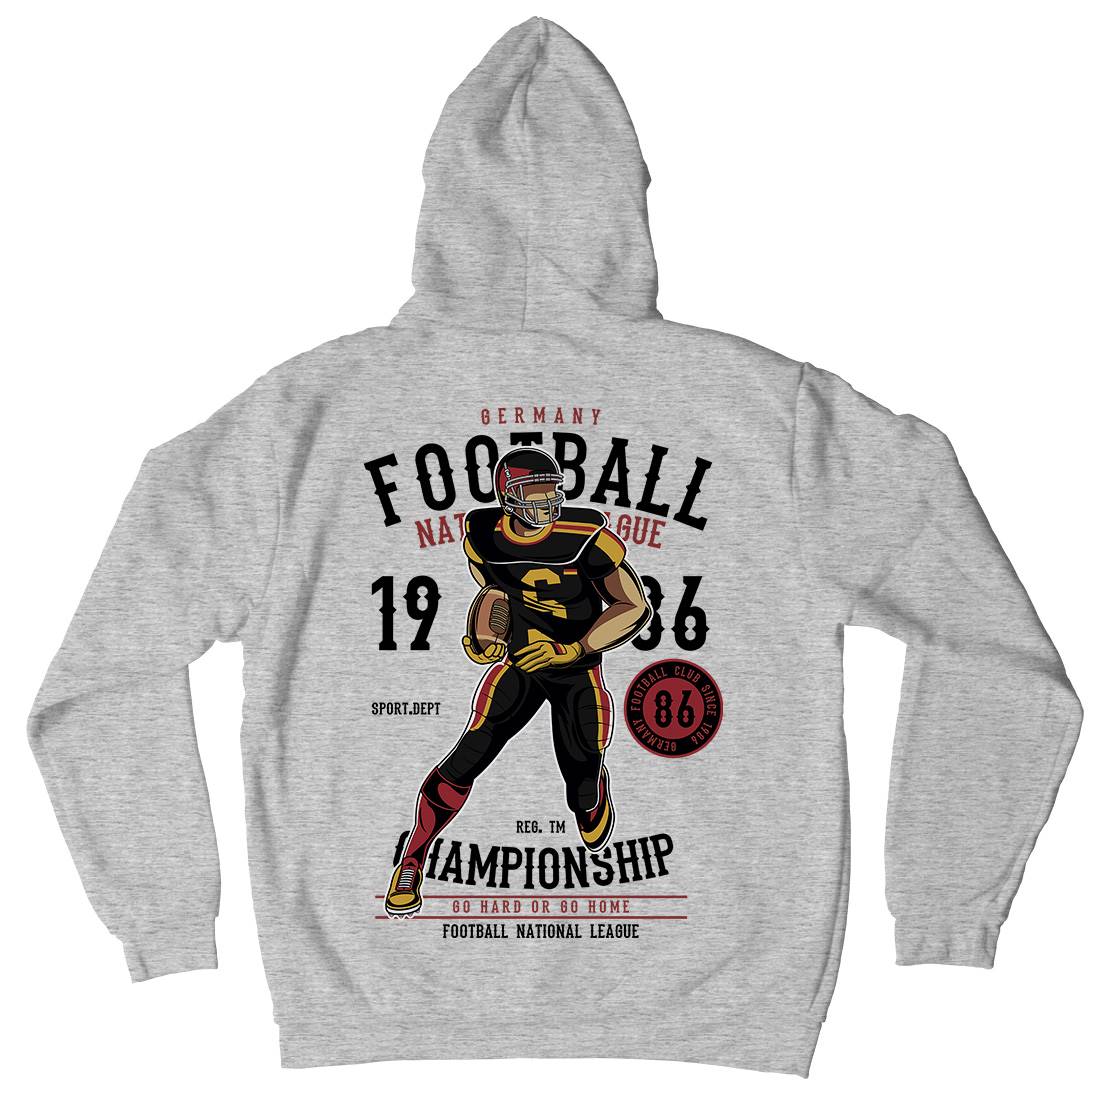 Germany Football Player Mens Hoodie With Pocket Sport C364